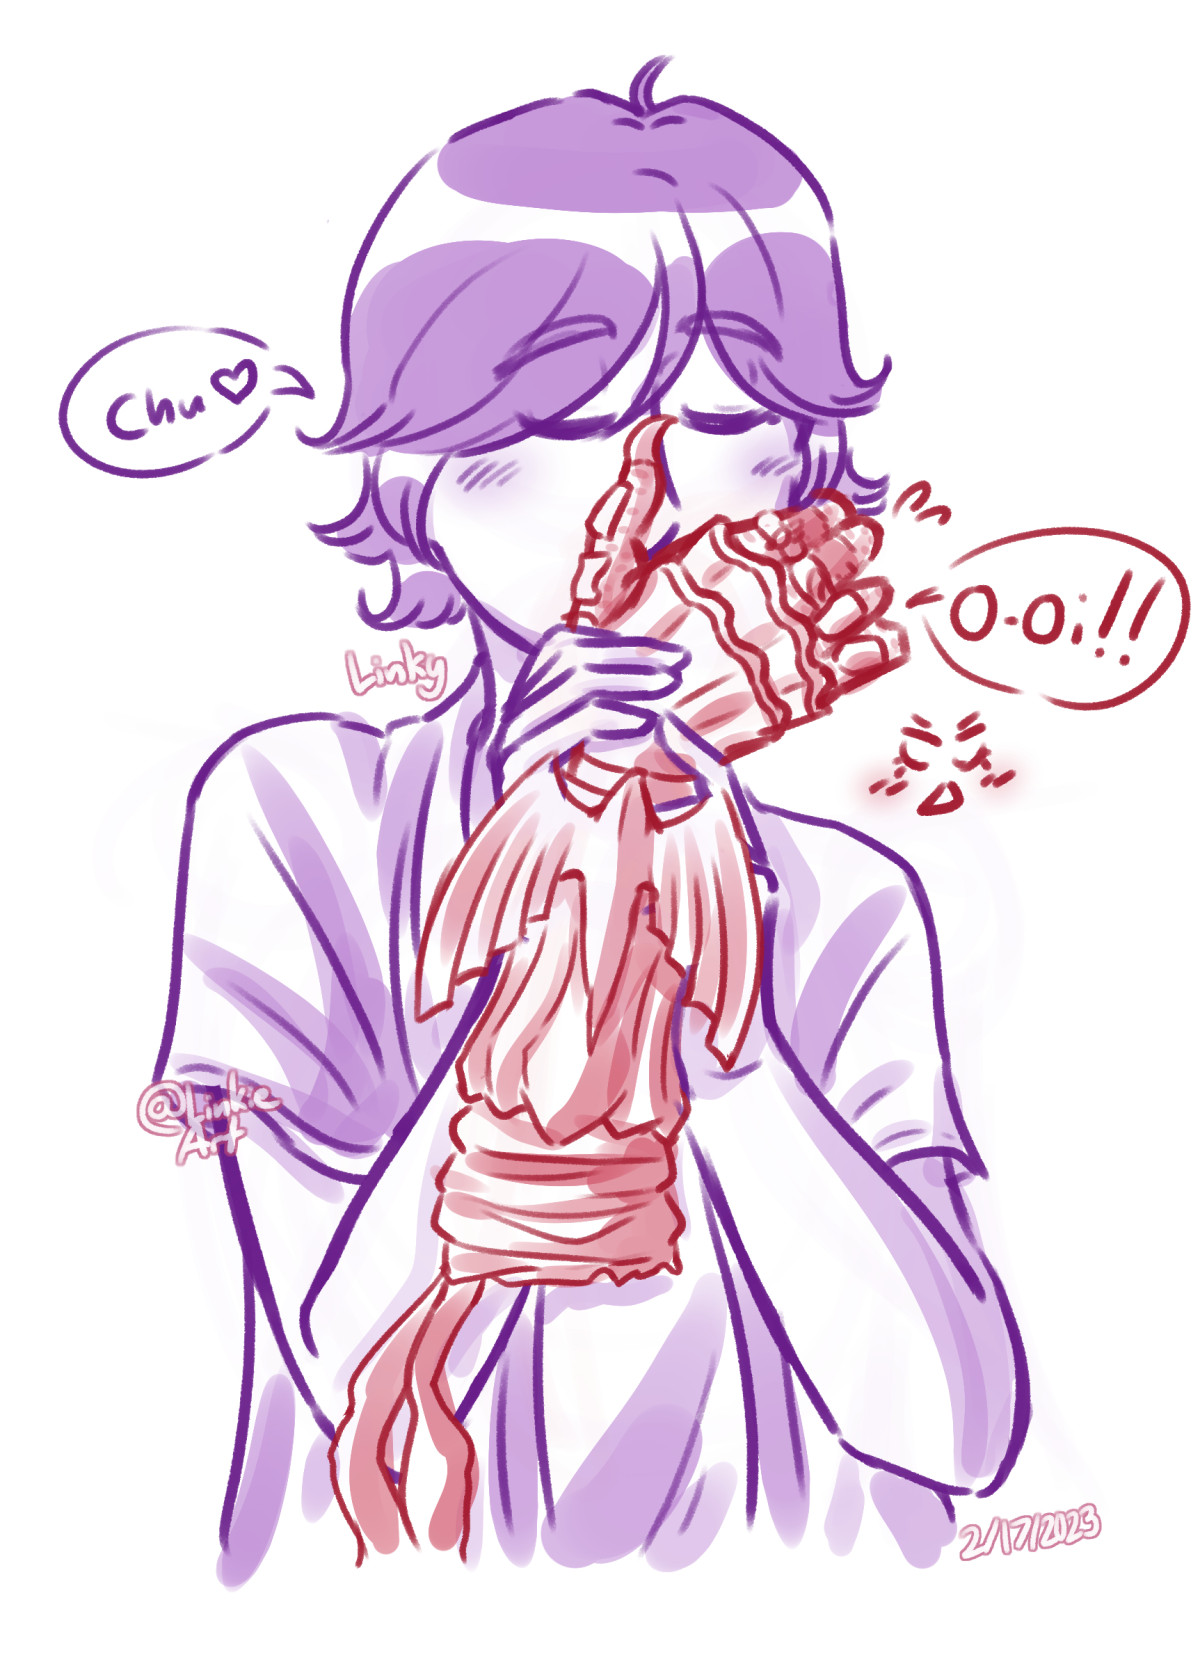 Fanart of Ankh and Eiji from Kamen Rider OOO. Ankh is in his Greeed arm form. Eiji is tenderly holding Ankh, while kissing his palm. His expression is gentle, his eyes are closed and he is slightly blushing. He is wearing a flowy top with loose sleeves going down to upper half of his arm. There is a shirt underneath. Ankh is shown with sweat drops, and a little angry and surprised expression that is blushing to express his embarrassment from suddenly being kissed. Eiji is saying Chu, the Japanese word for Kiss, while Ankh is screaming O-Oi!! Ankh has red lineart with lightred/pinkish shading, while Eiji has purple lineart with light purple shading. Both are drawn over a white background.